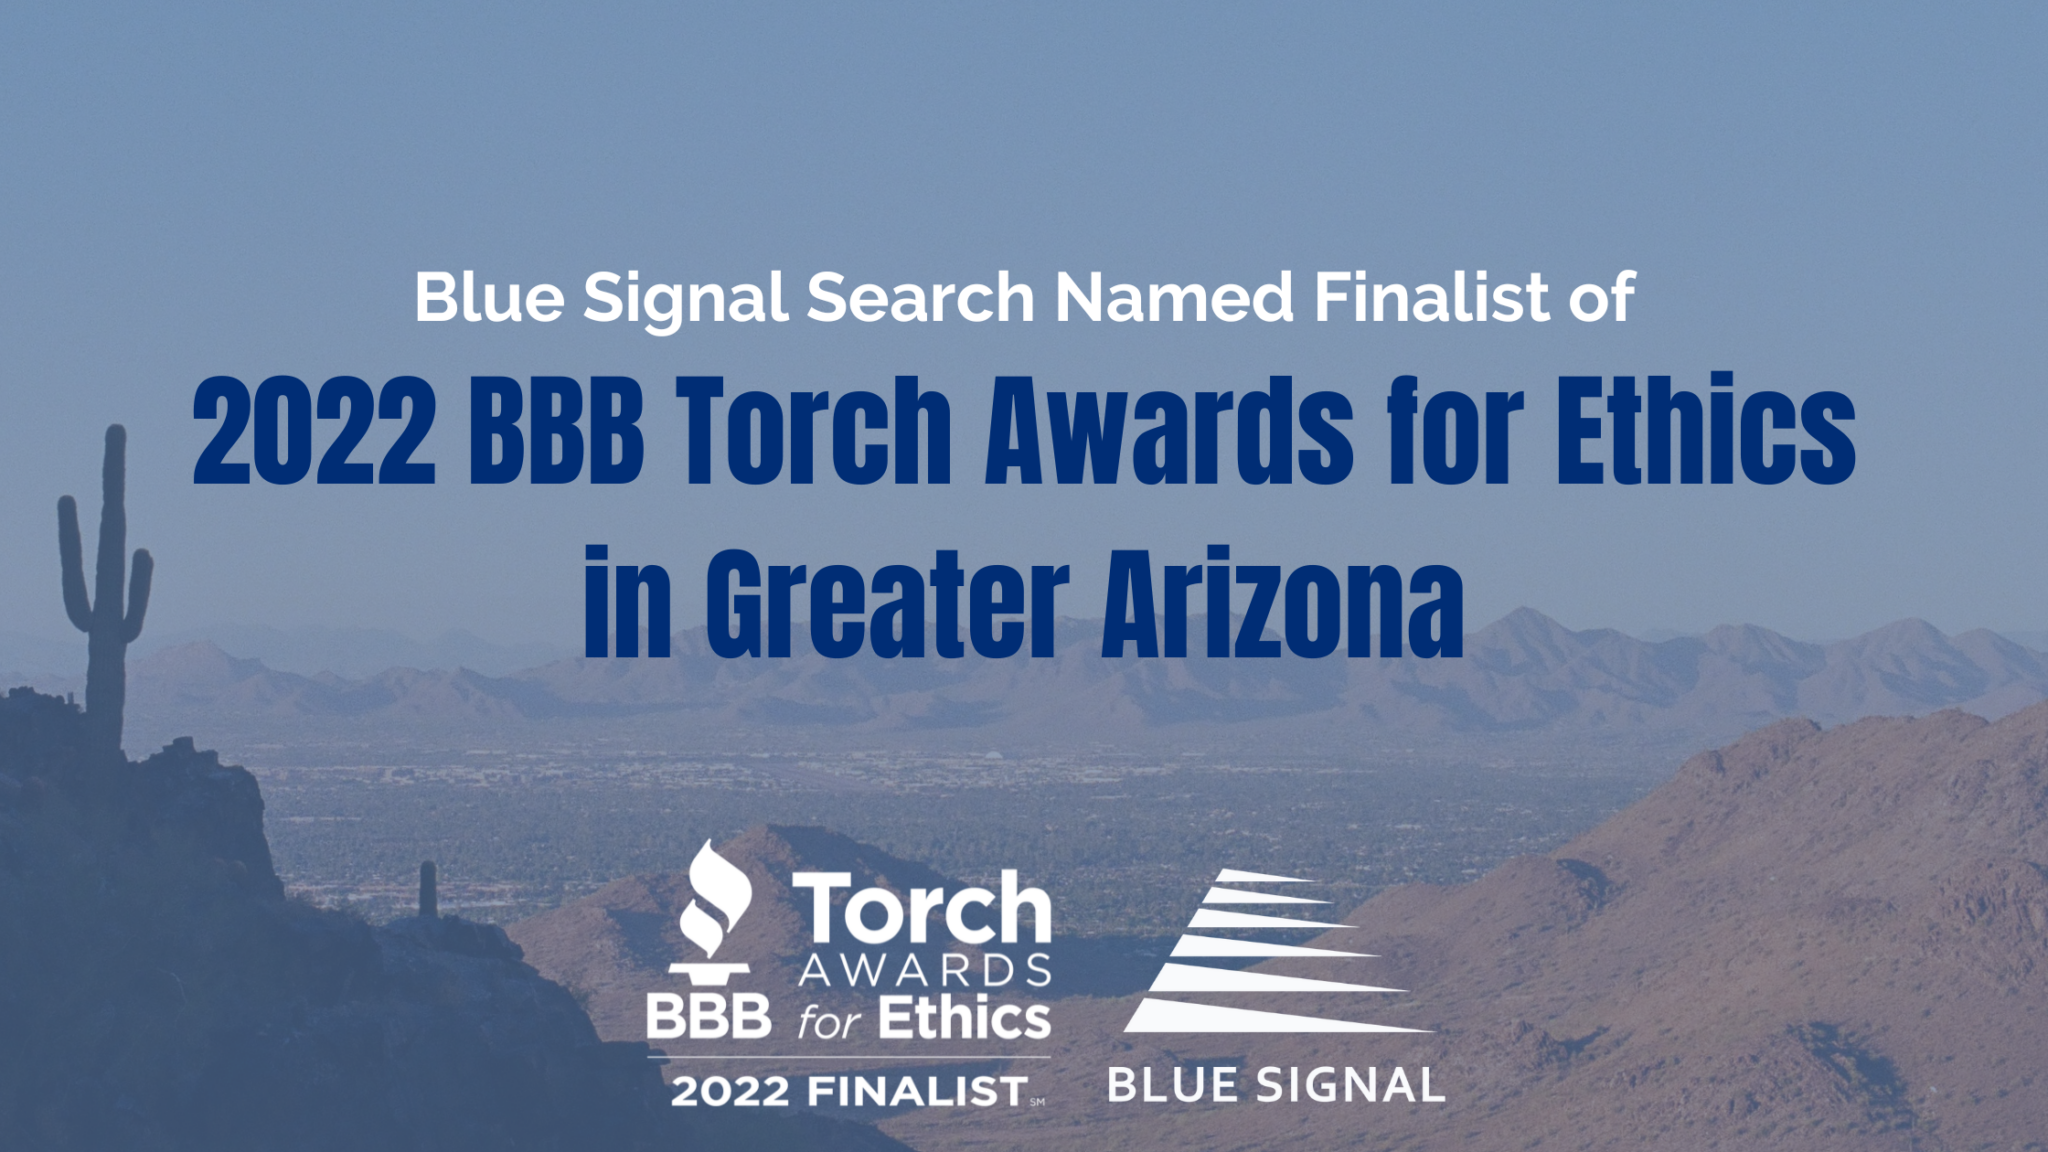 Background of a desert landscape with the text "Blue Signal Search Named Finalist of 2022 BBB Torch Awards for Ethics in Greater Arizona" overlaying. Logos for BBB Torch for Ethics and Blue Signal included in white on the bottom of the image.